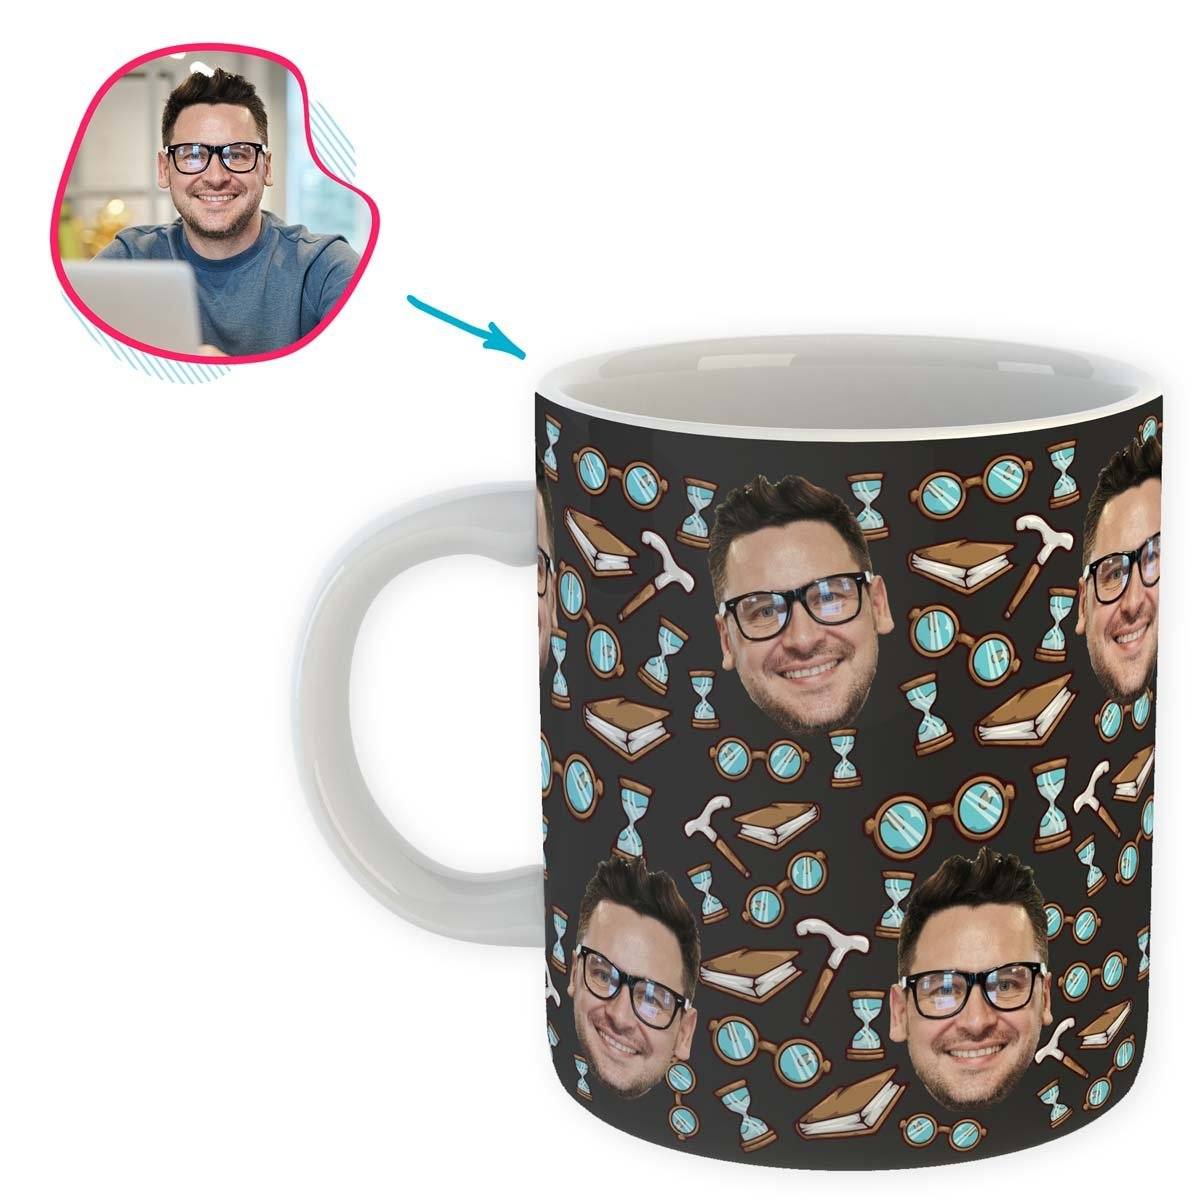 Dark Retirement personalized mug with photo of face printed on it